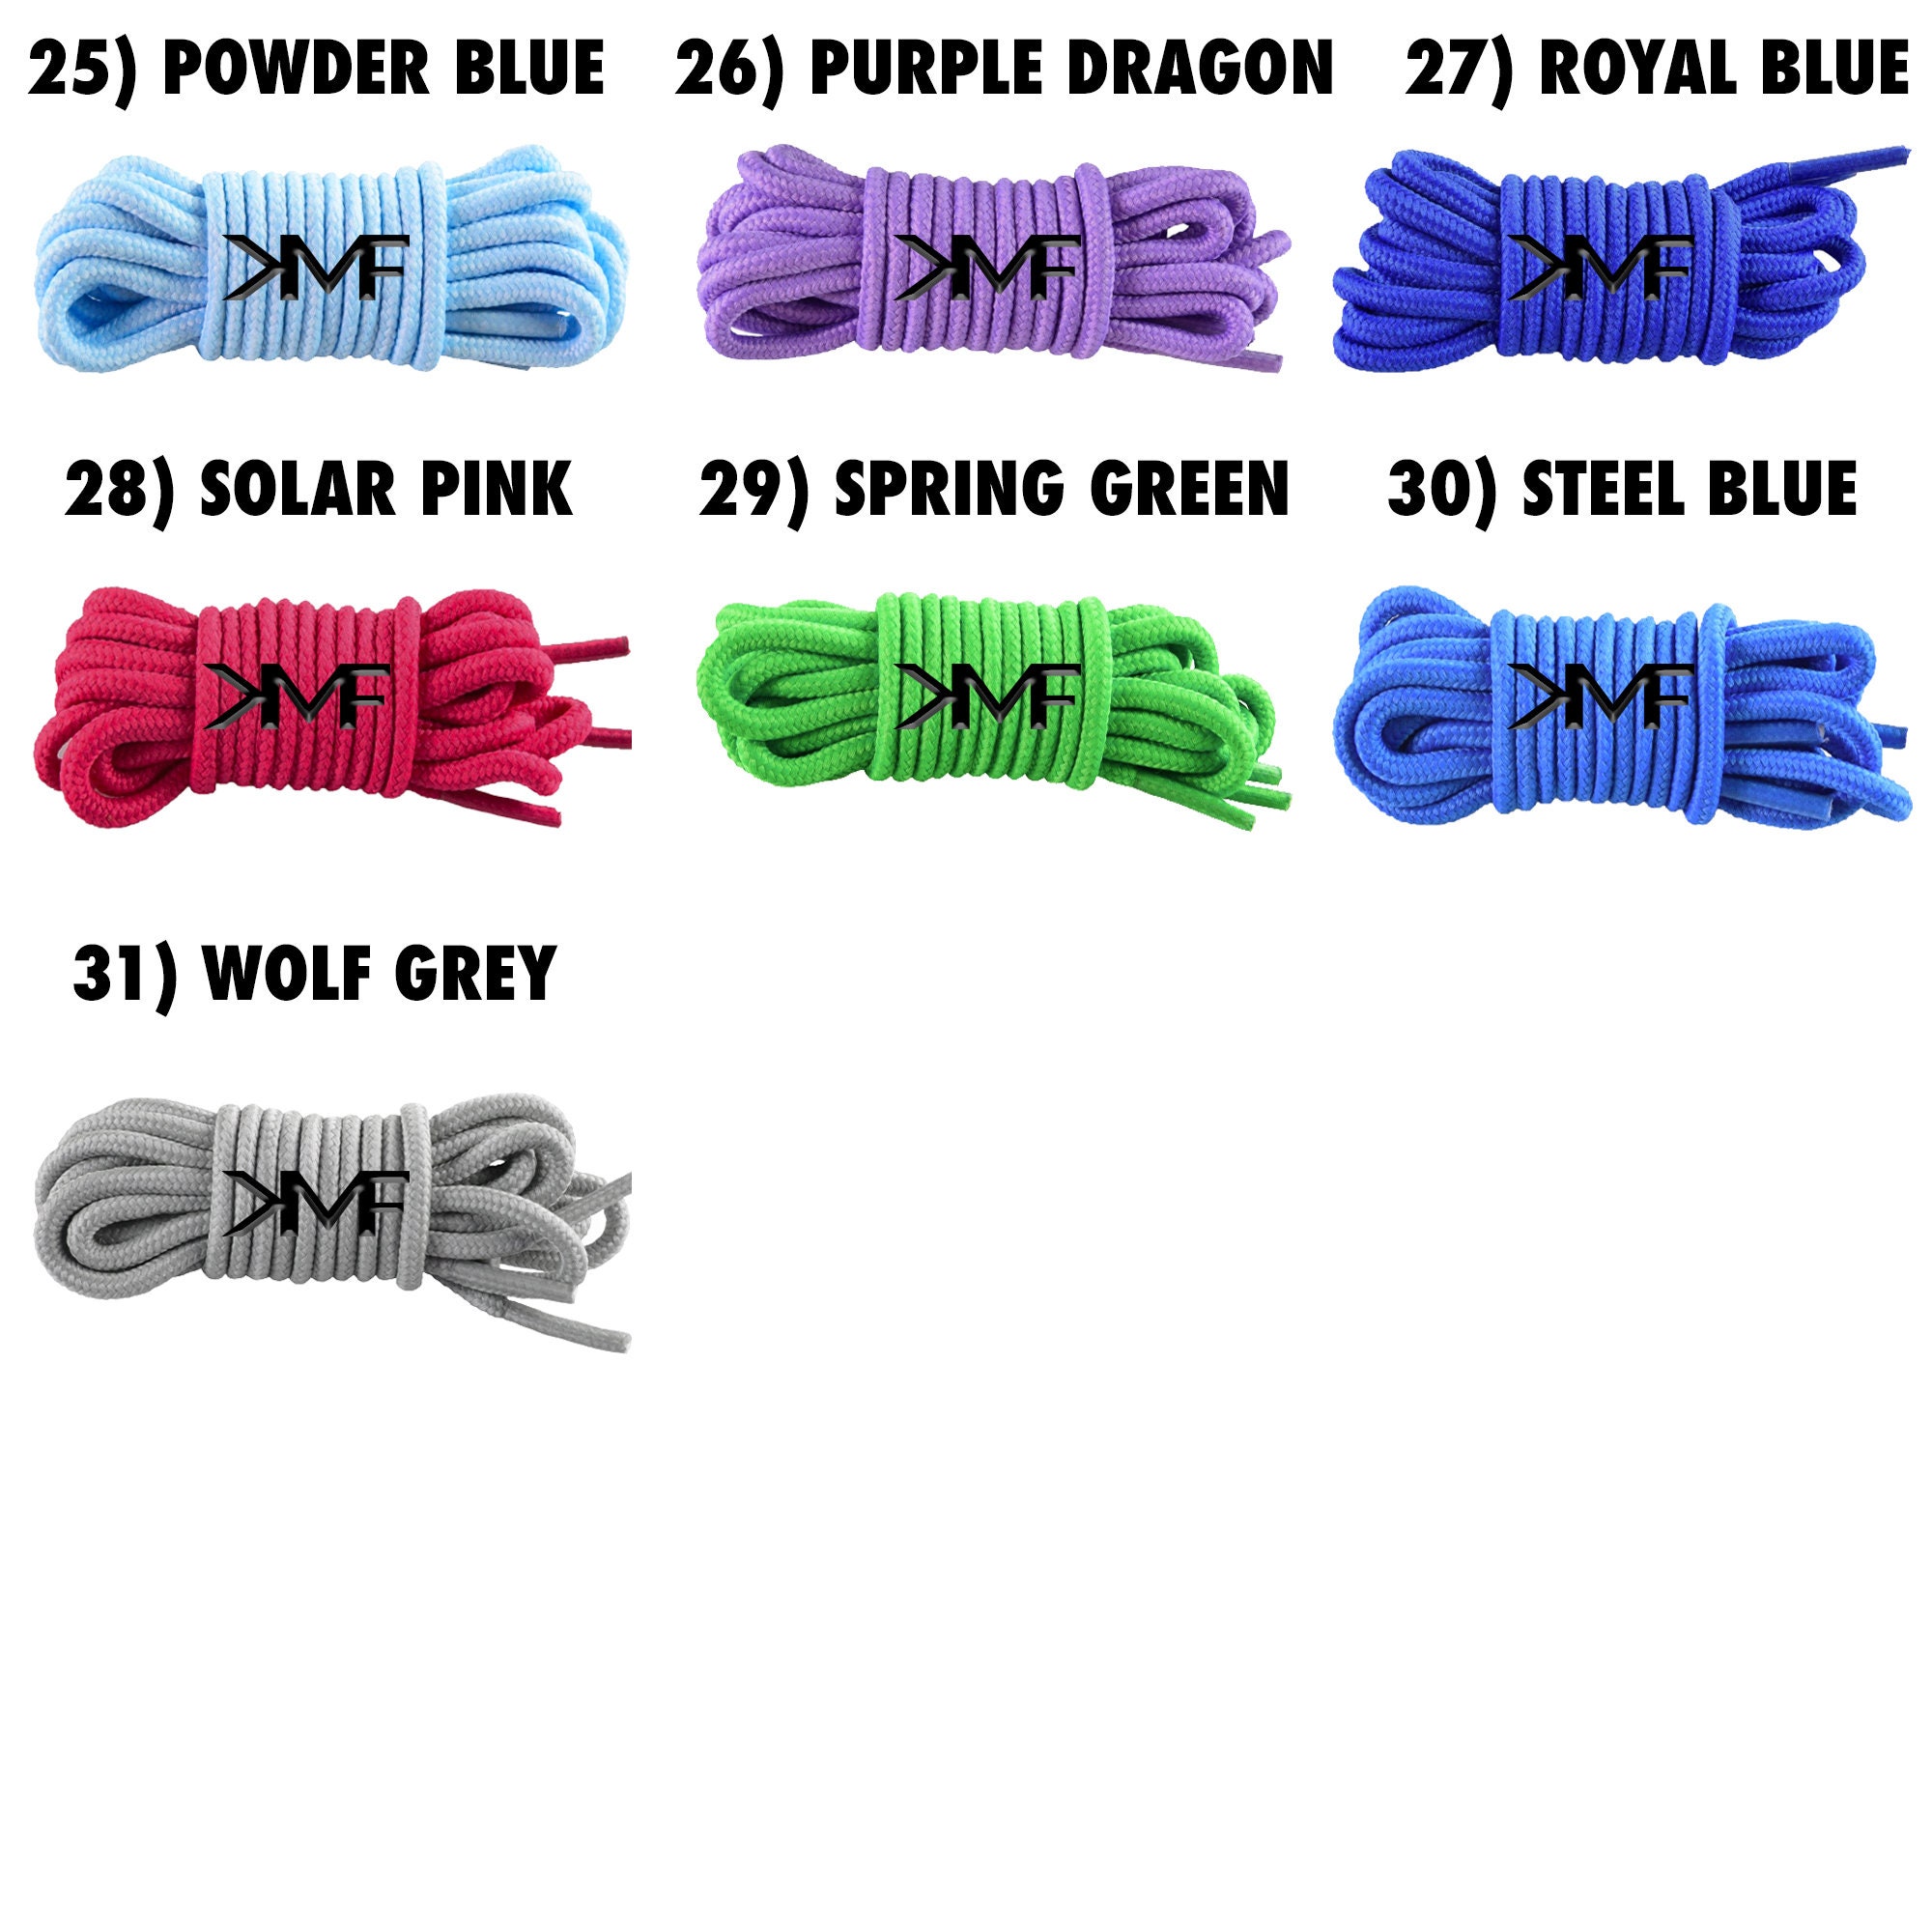 Luxury Lace Locks Colorful Metal Shoelace Stoppers Premium Quality